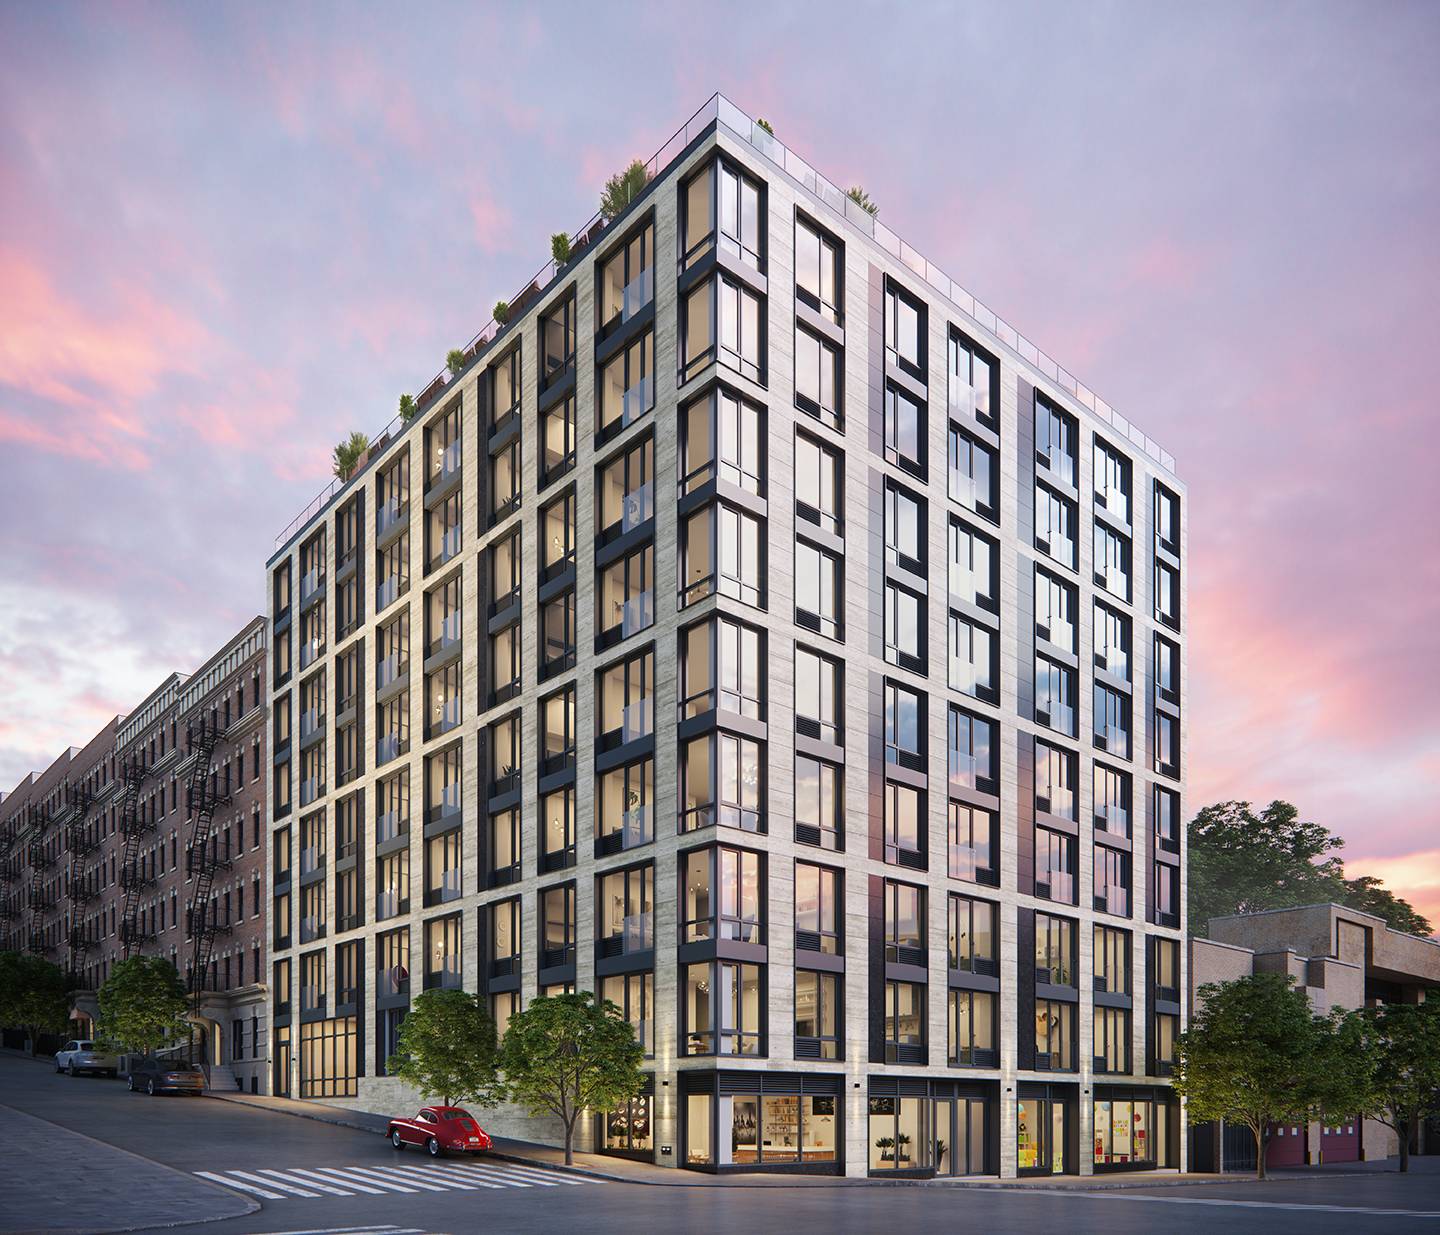 IMMEDIATE OCCUPANCY Move right into this stunning 2 bedroom, 1 bathroom home and enjoy a contemporary lifestyle at East Harlem's newest development.